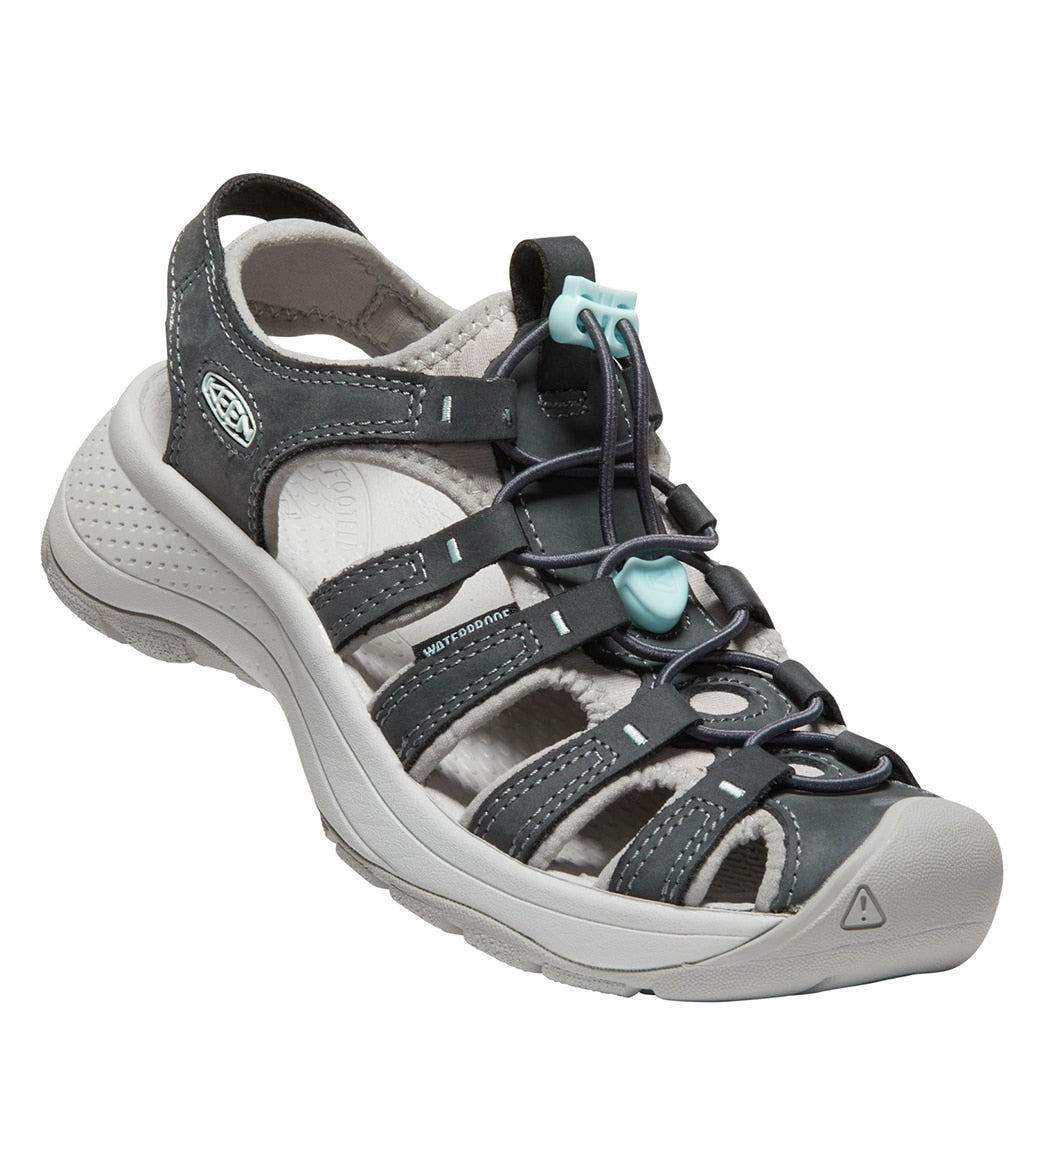 Keen Womens Astoria West Leather Water Shoes